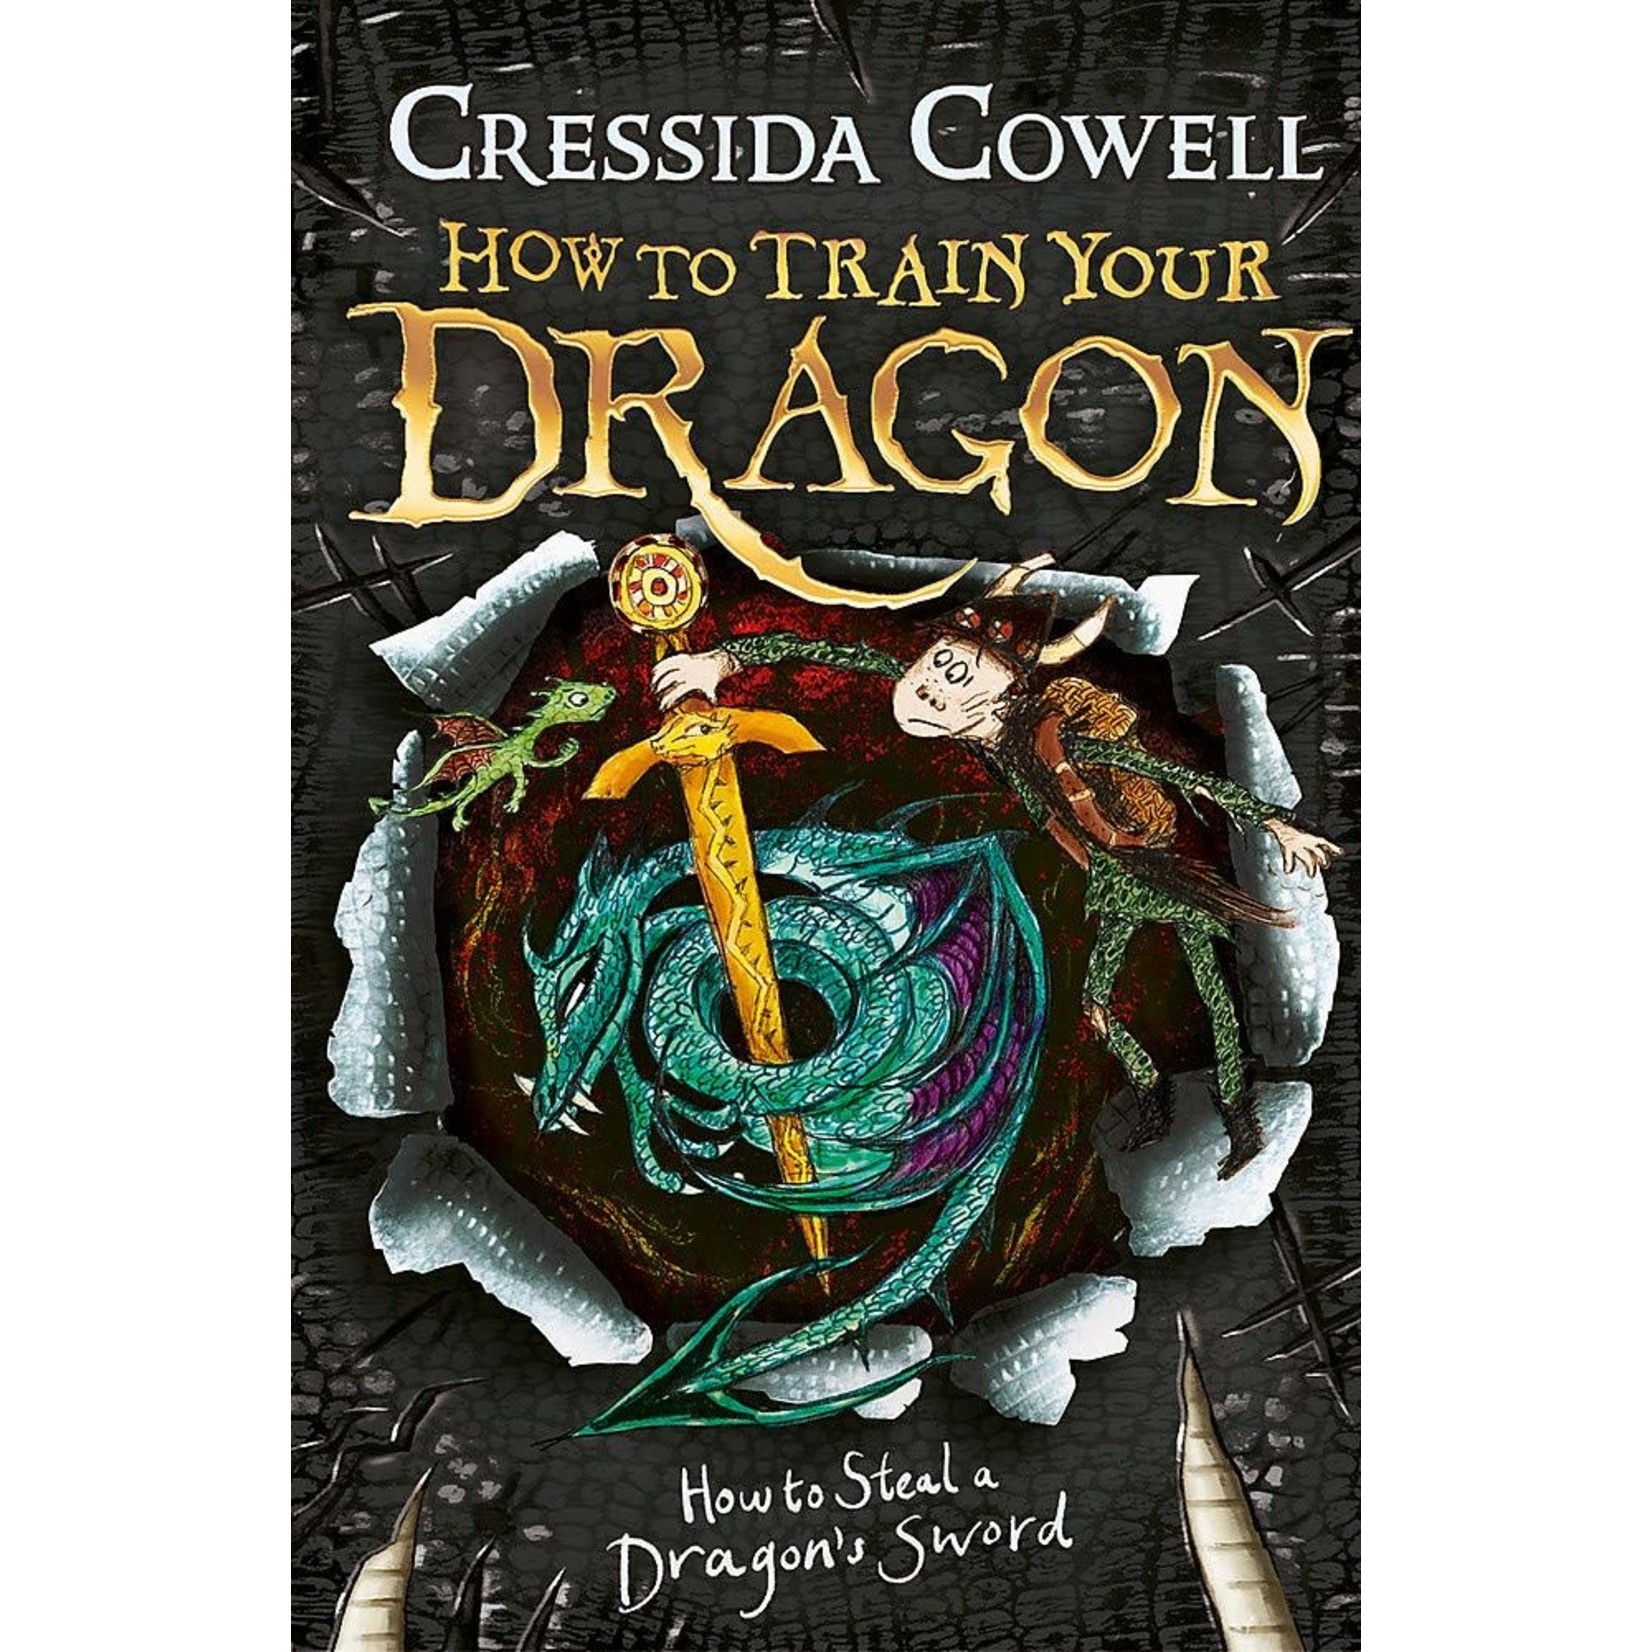 Cressida Cowell How to Train Your Dragon - How to Steal a Dragon's Sword